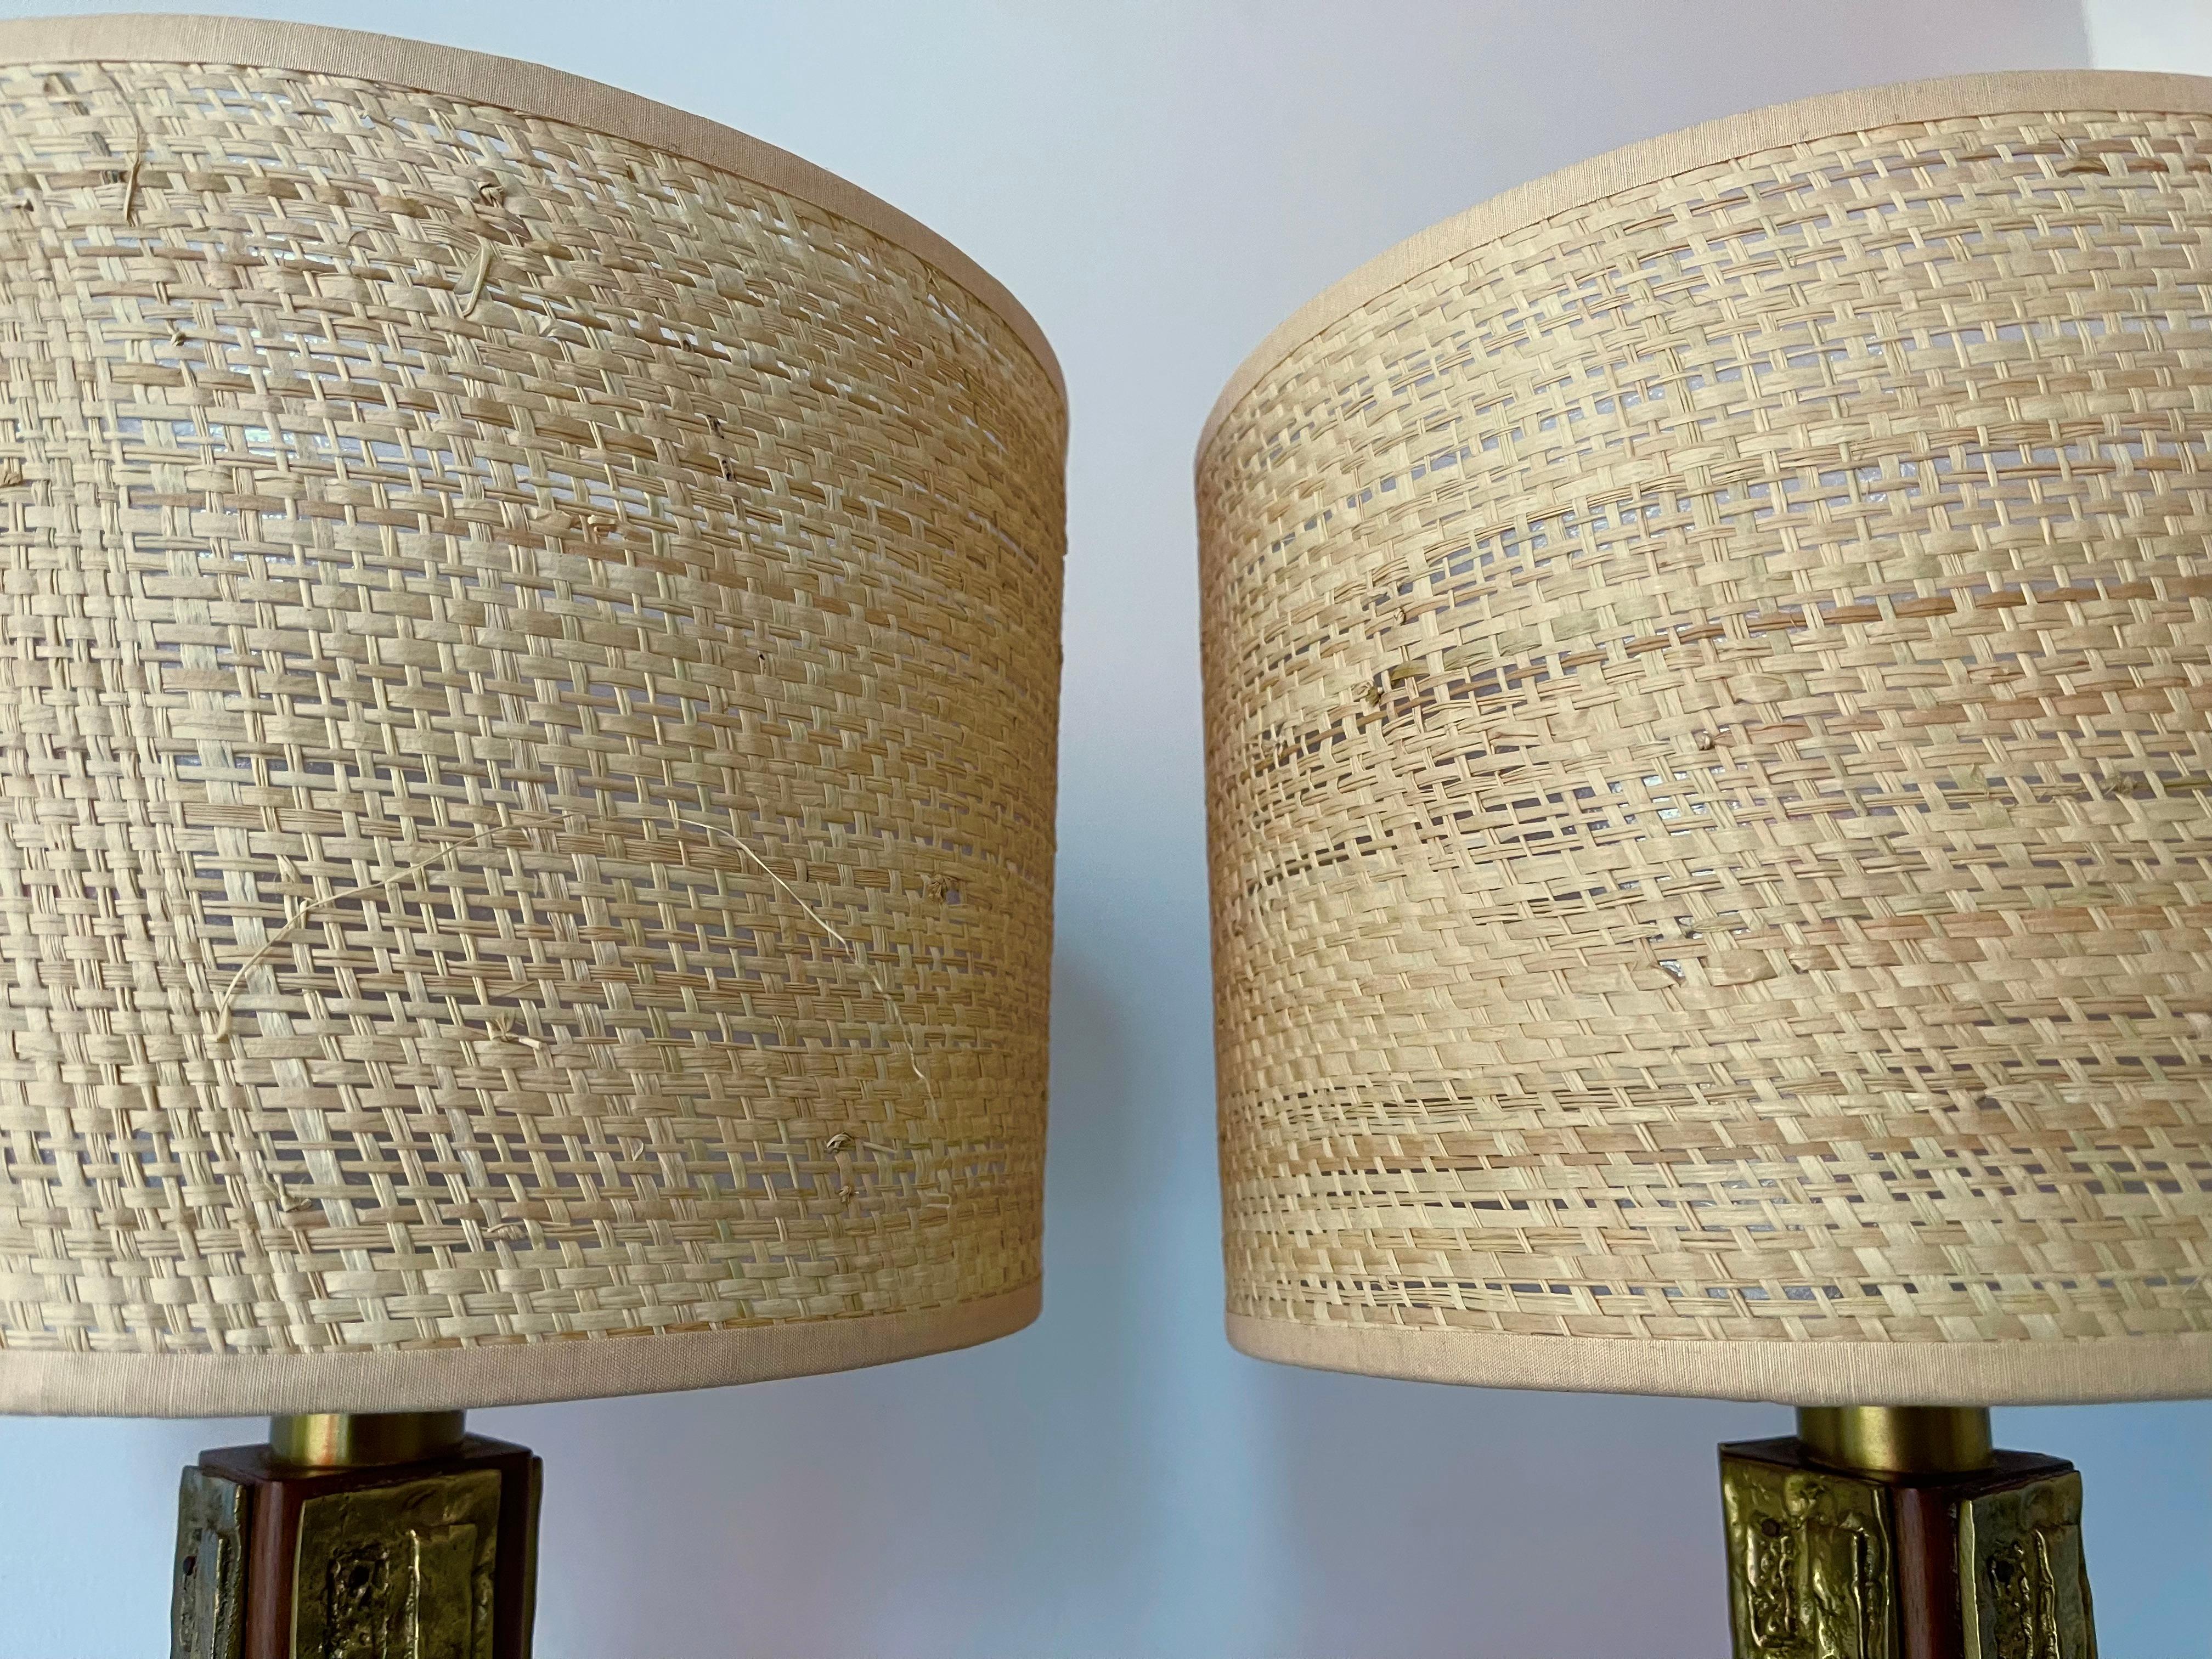 Pair of Brass and Wood Sculpture Lamps by Angelo Brotto for Esperia Italy, 1970s For Sale 1